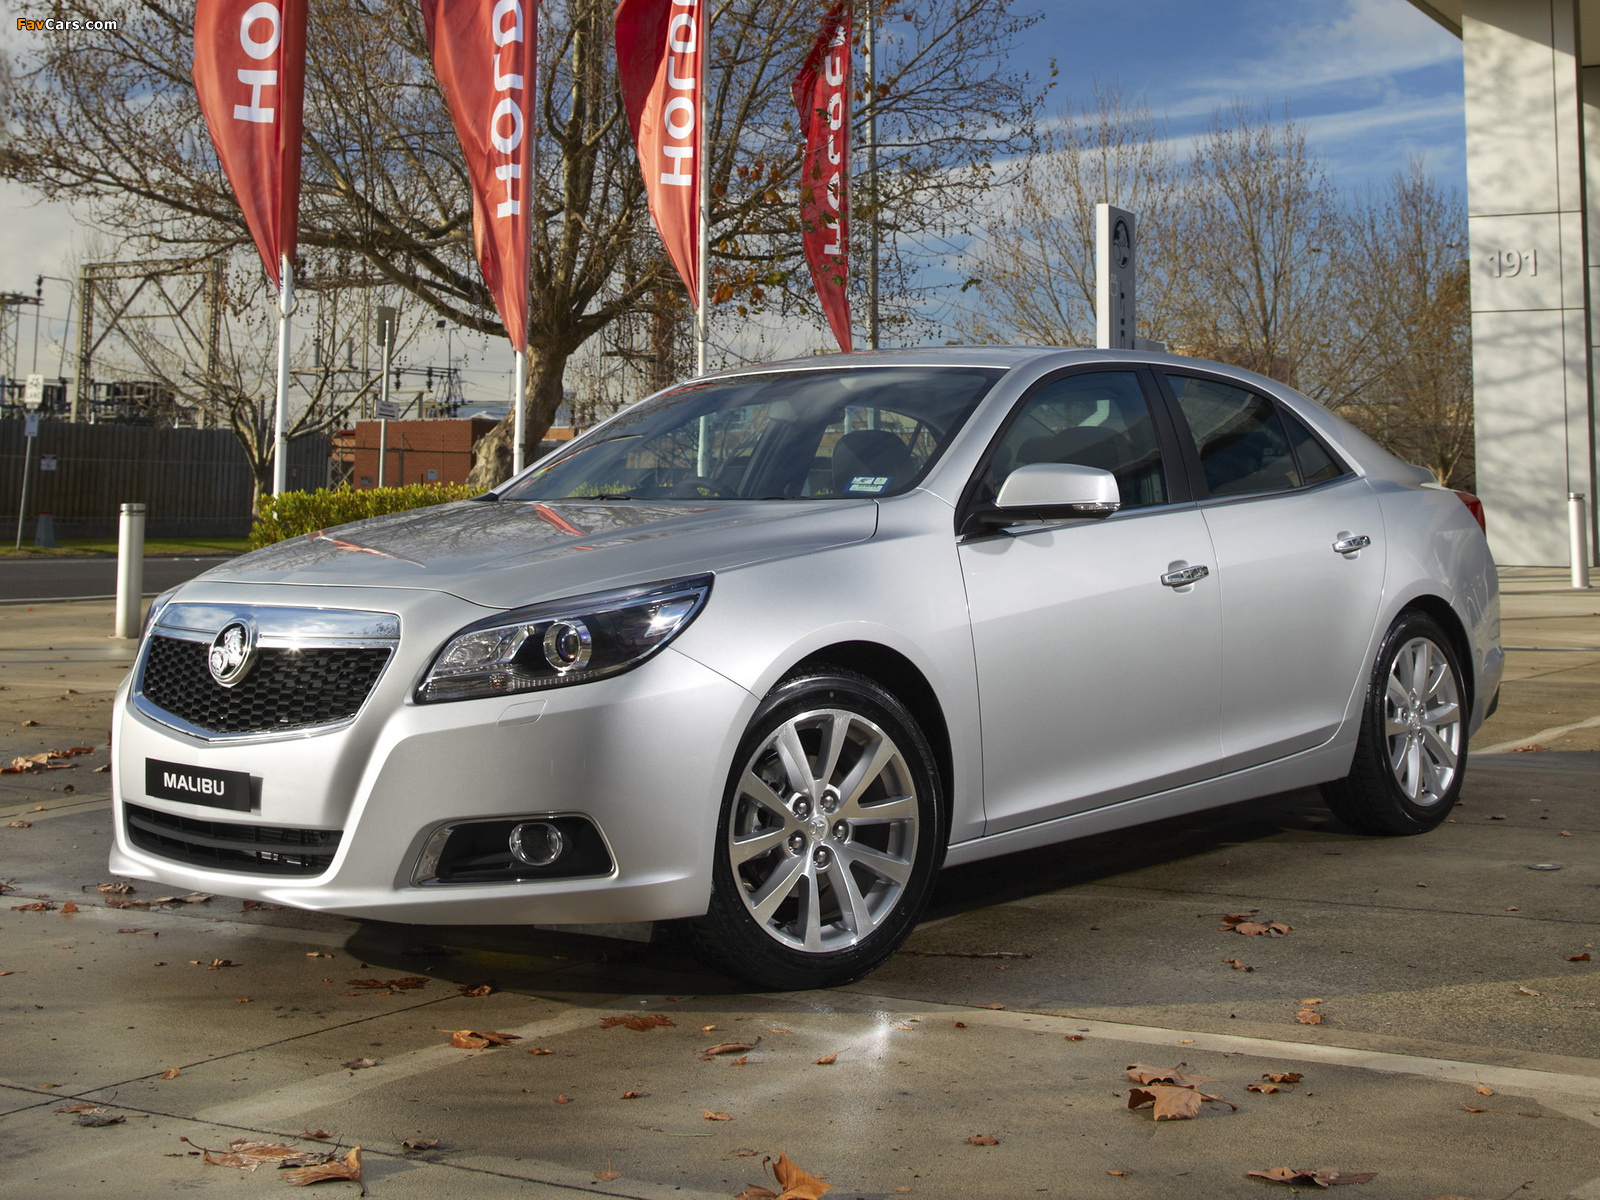 Holden Malibu CDX 2013 pictures (1600 x 1200)